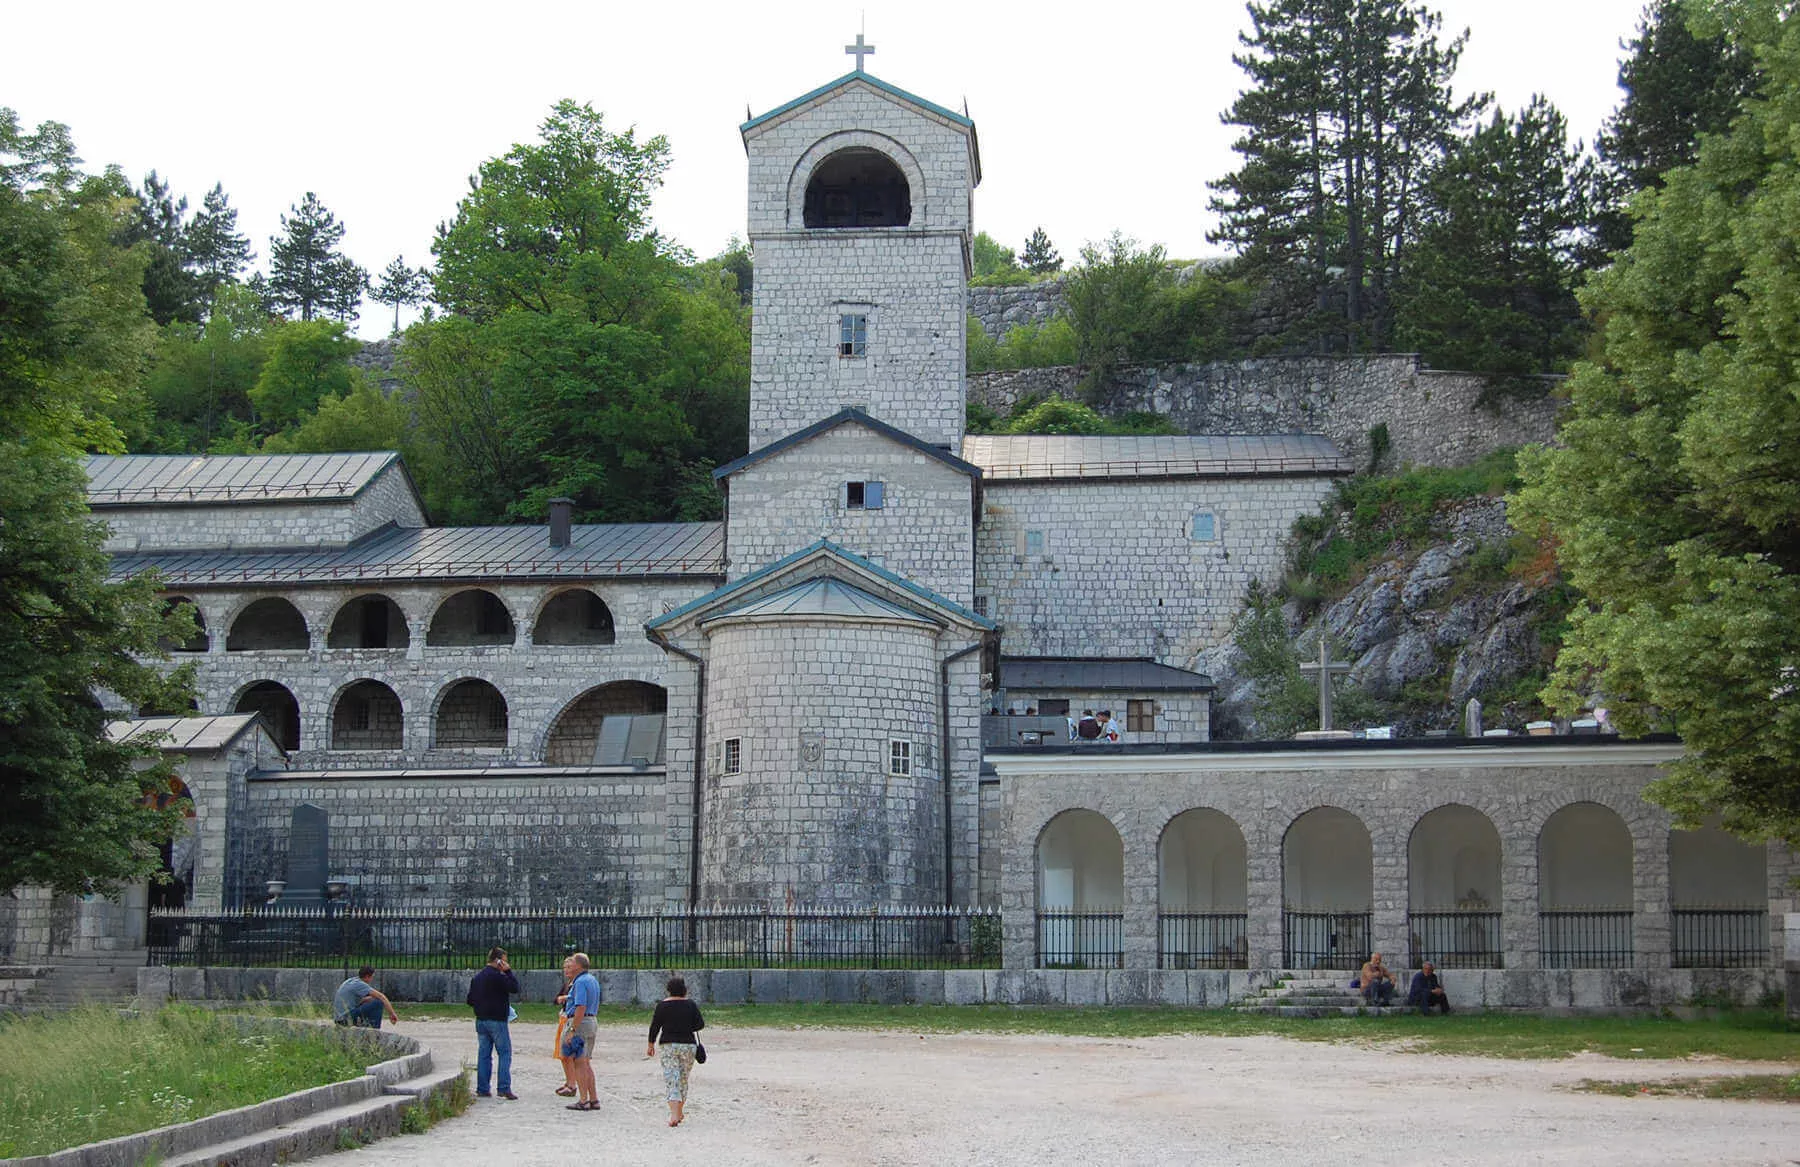 The Monastery of St. Peter of Cetinje is an integral part of the community